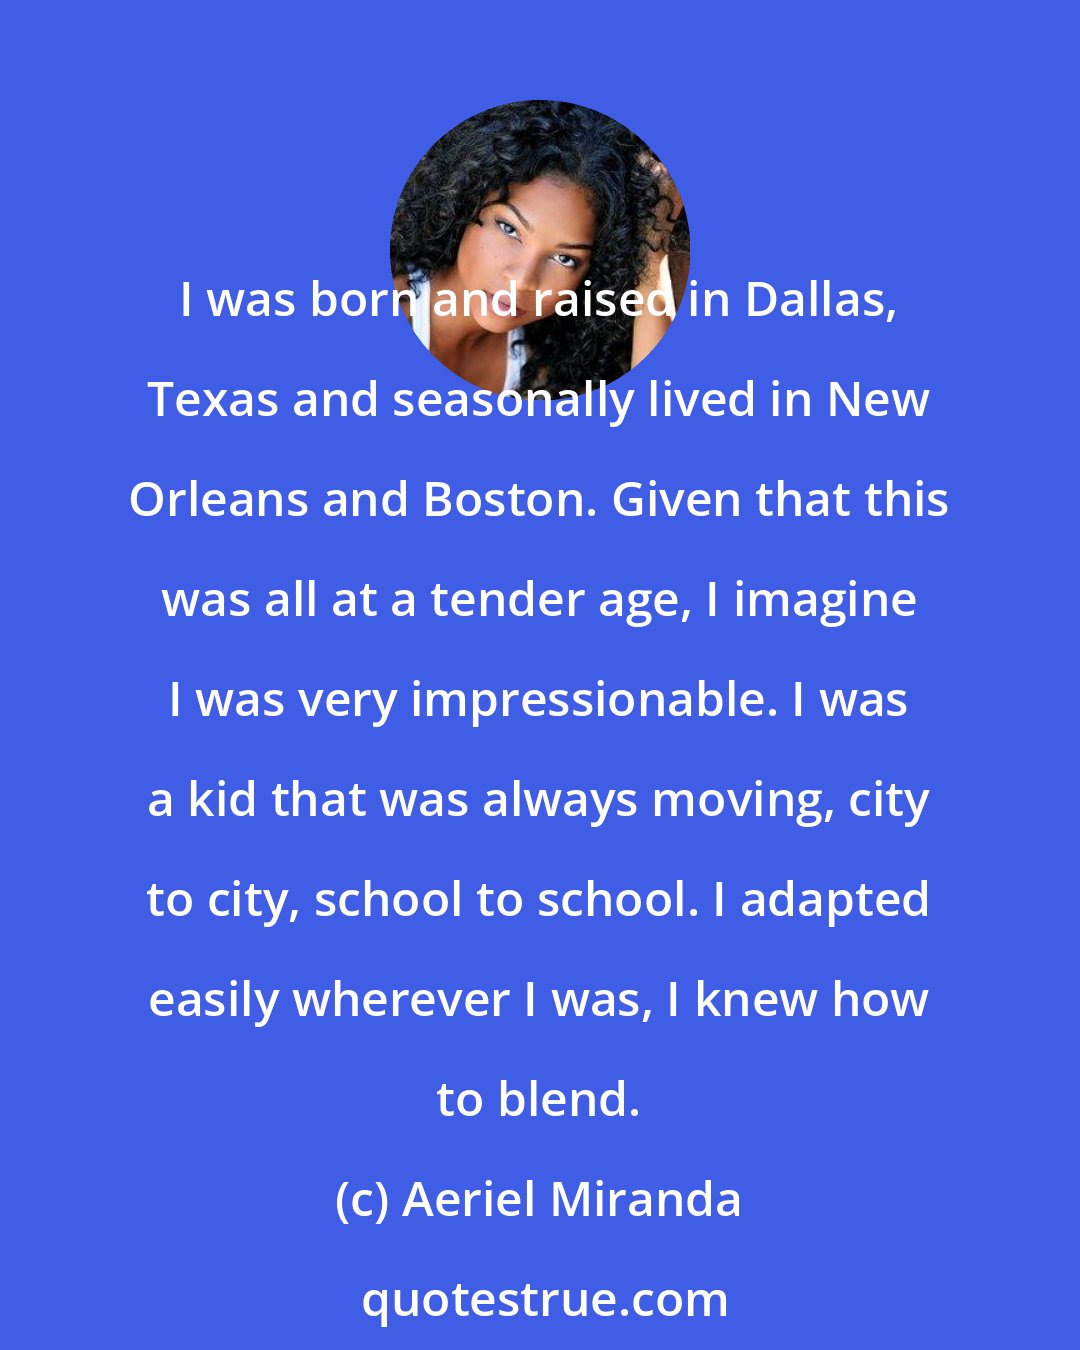 Aeriel Miranda: I was born and raised in Dallas, Texas and seasonally lived in New Orleans and Boston. Given that this was all at a tender age, I imagine I was very impressionable. I was a kid that was always moving, city to city, school to school. I adapted easily wherever I was, I knew how to blend.